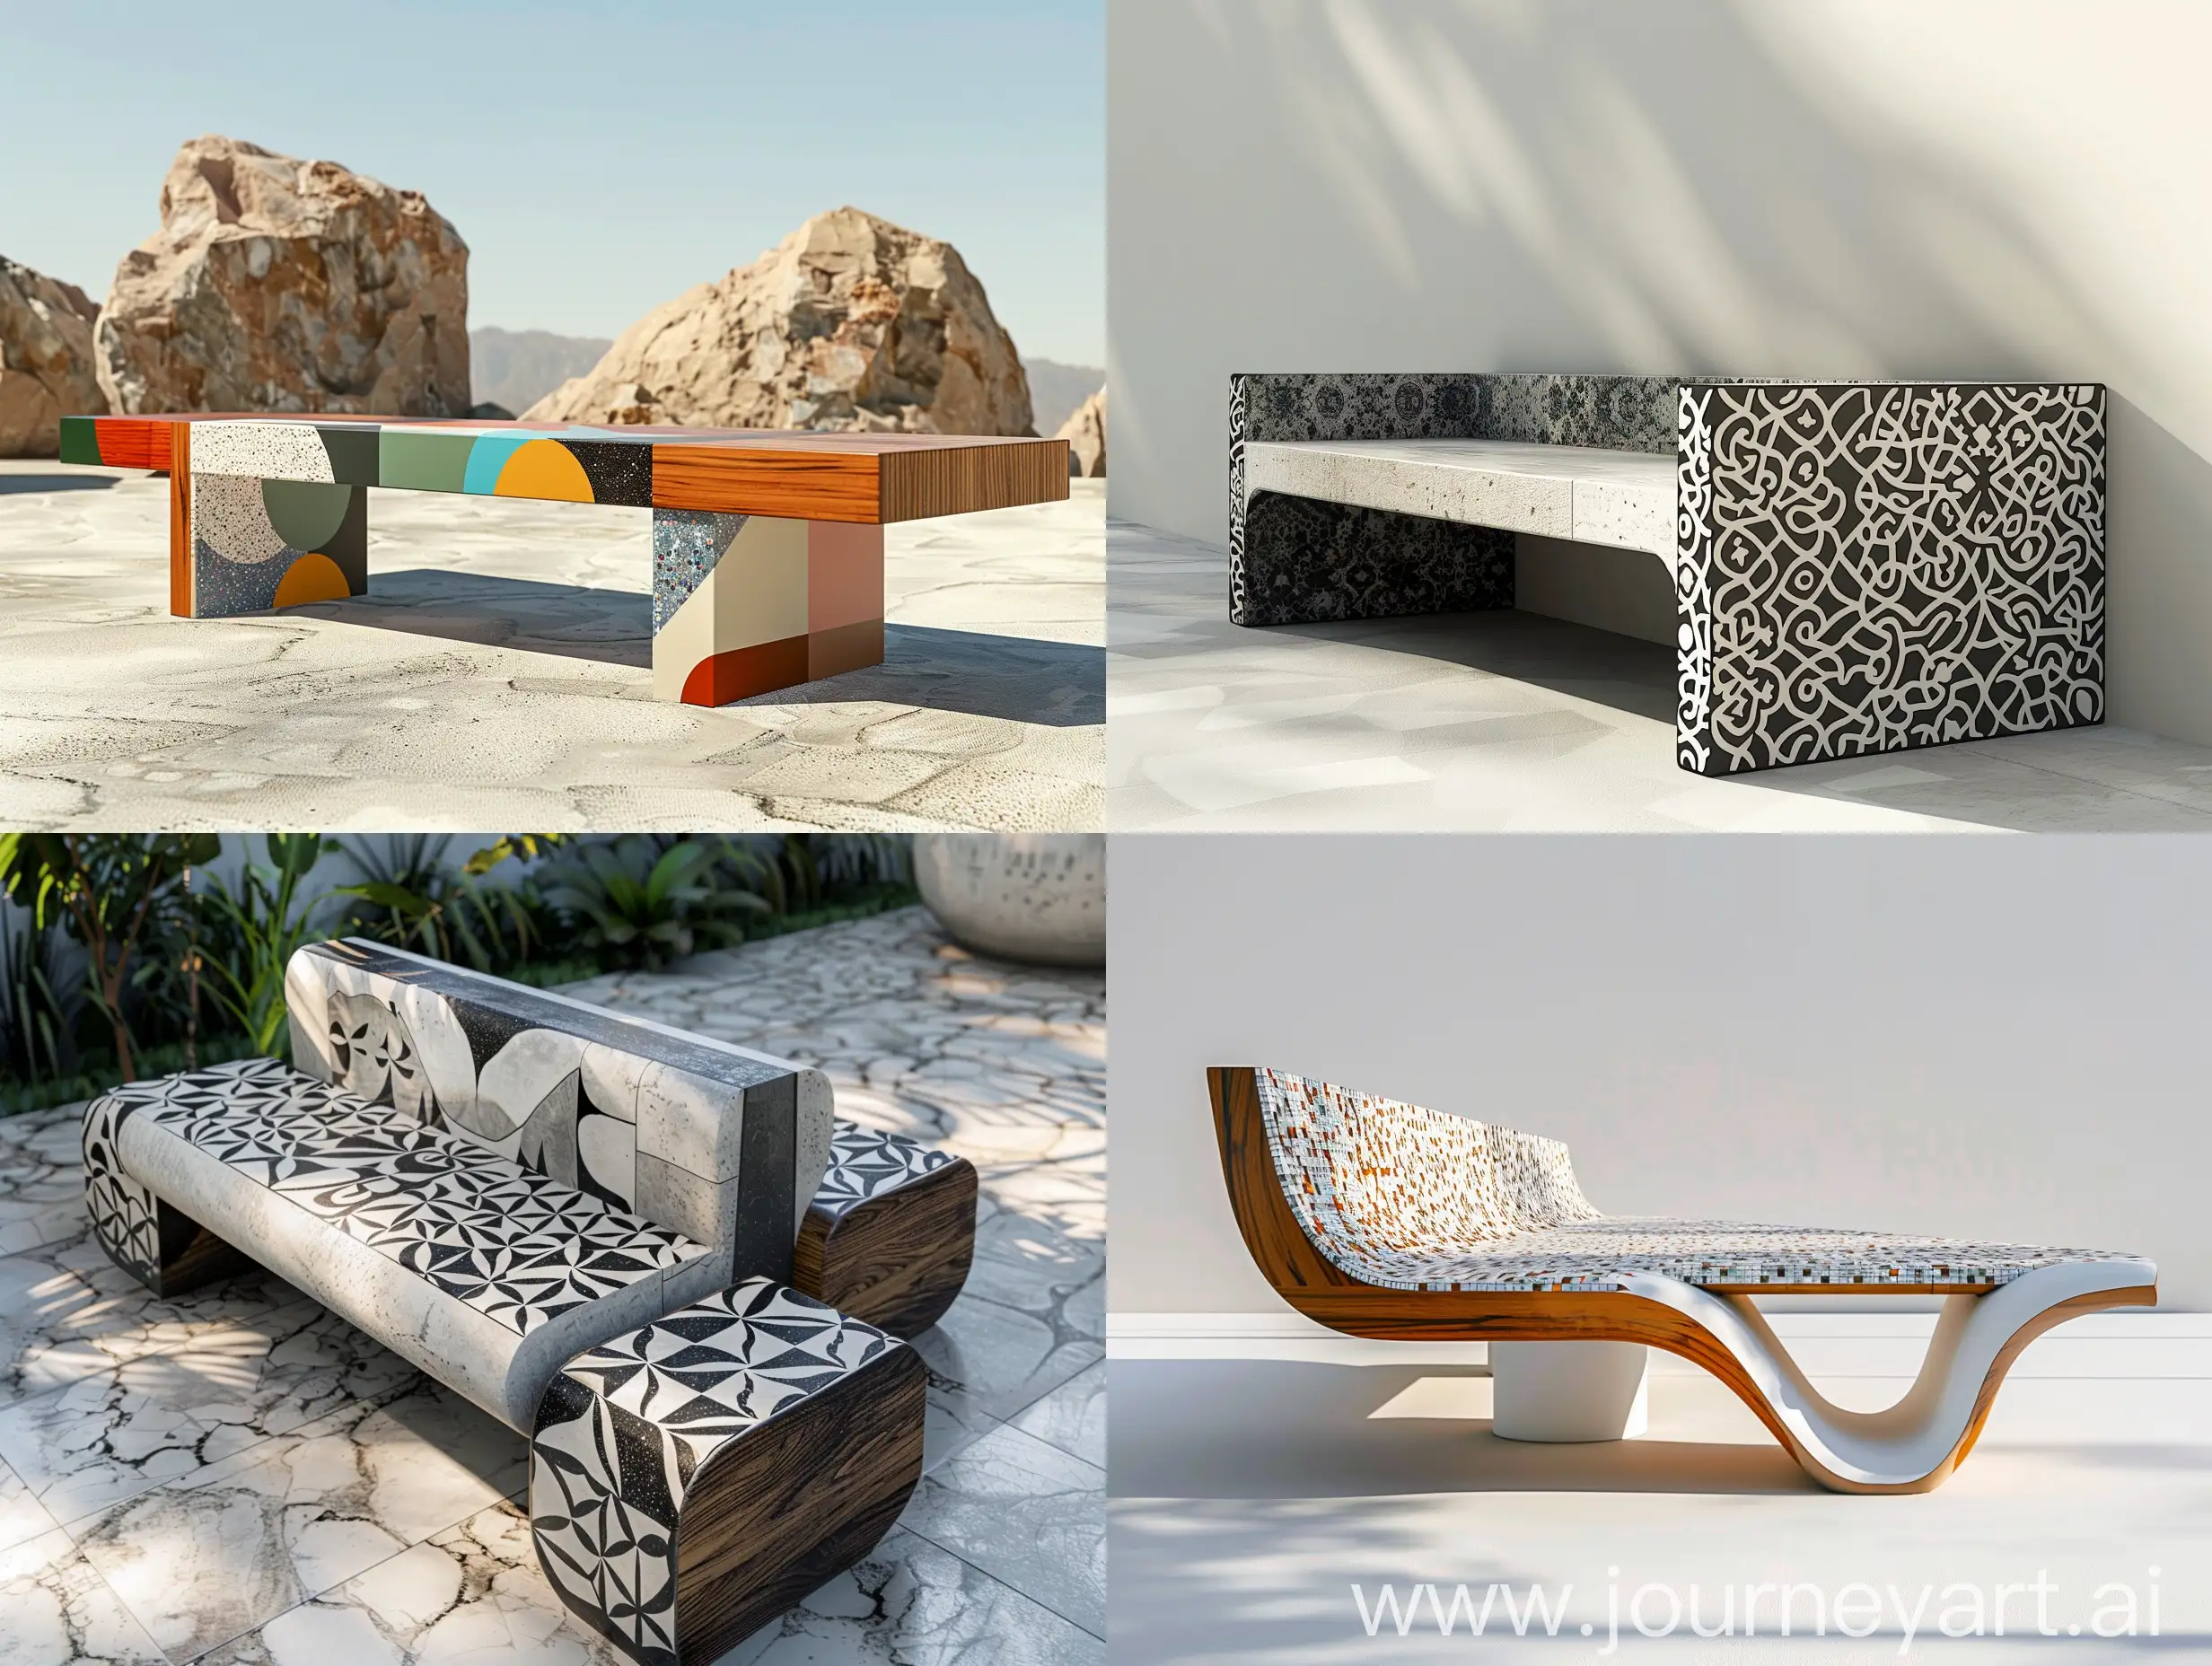 Minimal-and-Modern-Modular-Outdoor-Bench-Inspired-by-Persian-Art-with-Bauhaus-Graphic-Design-Style